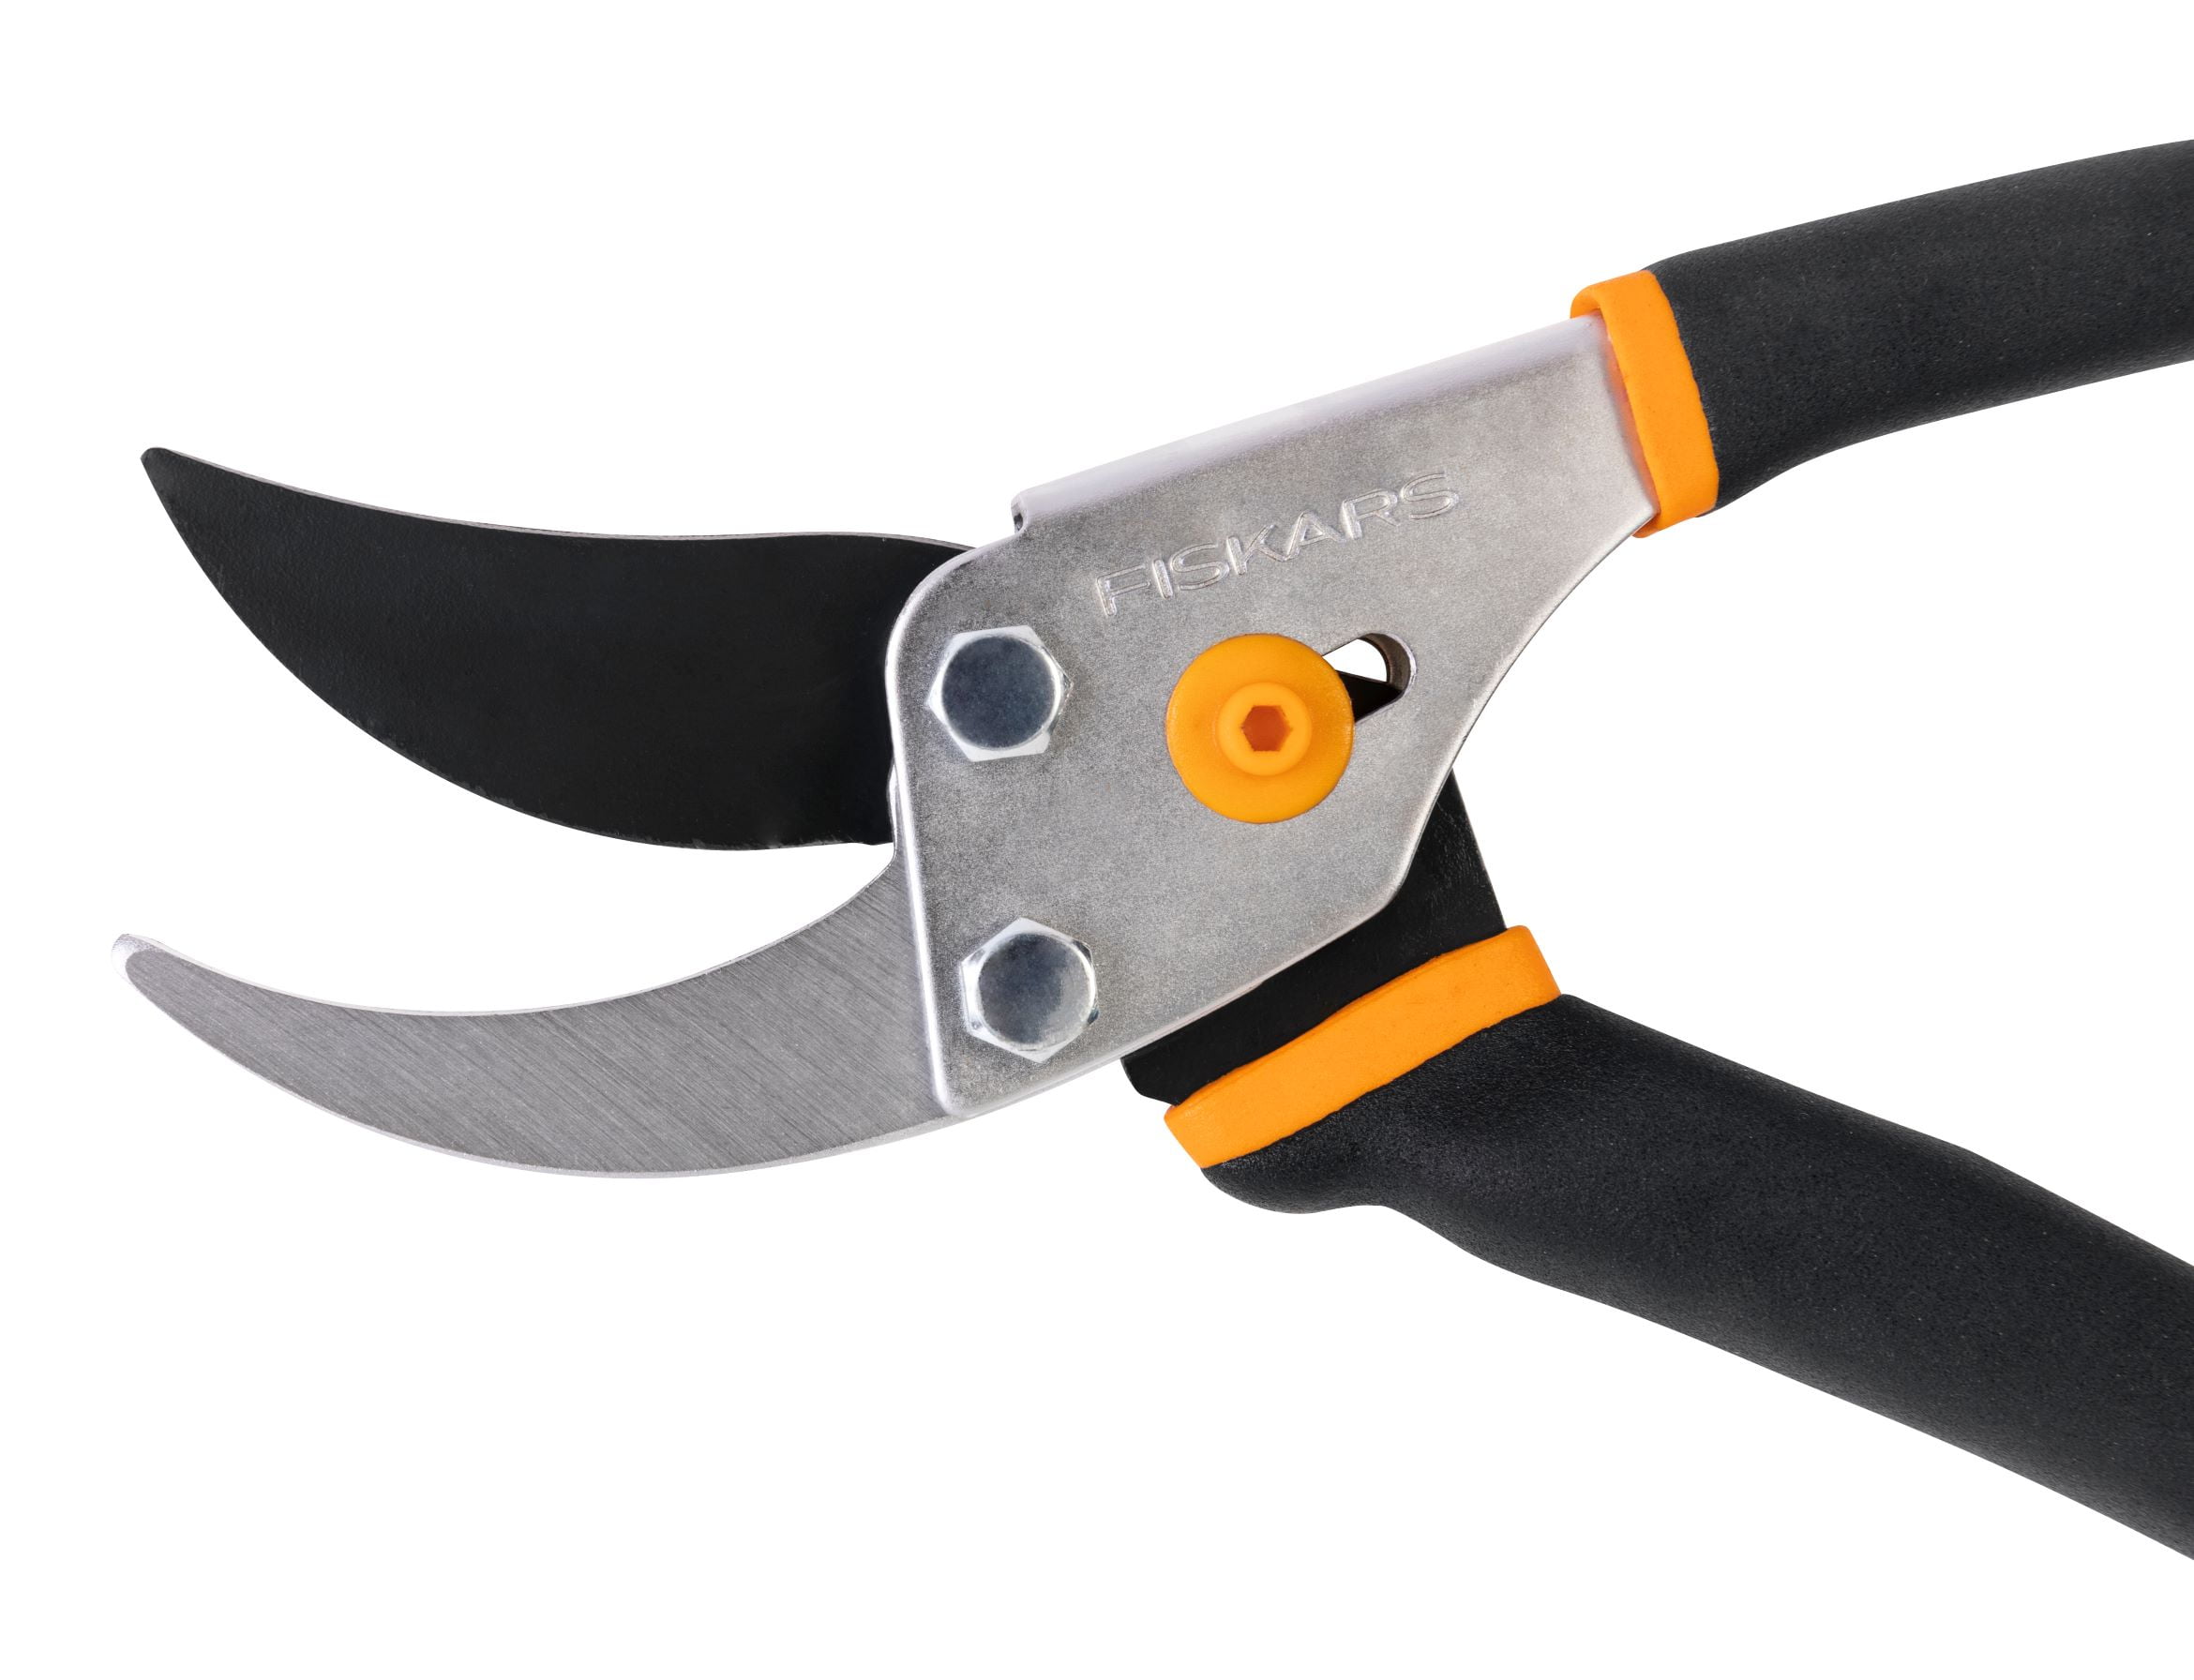 Fiskars Large Bypass Pruner, Steel Blade with Softgrip Handle for Medium to Large Hands, Size: 12 inch, Black